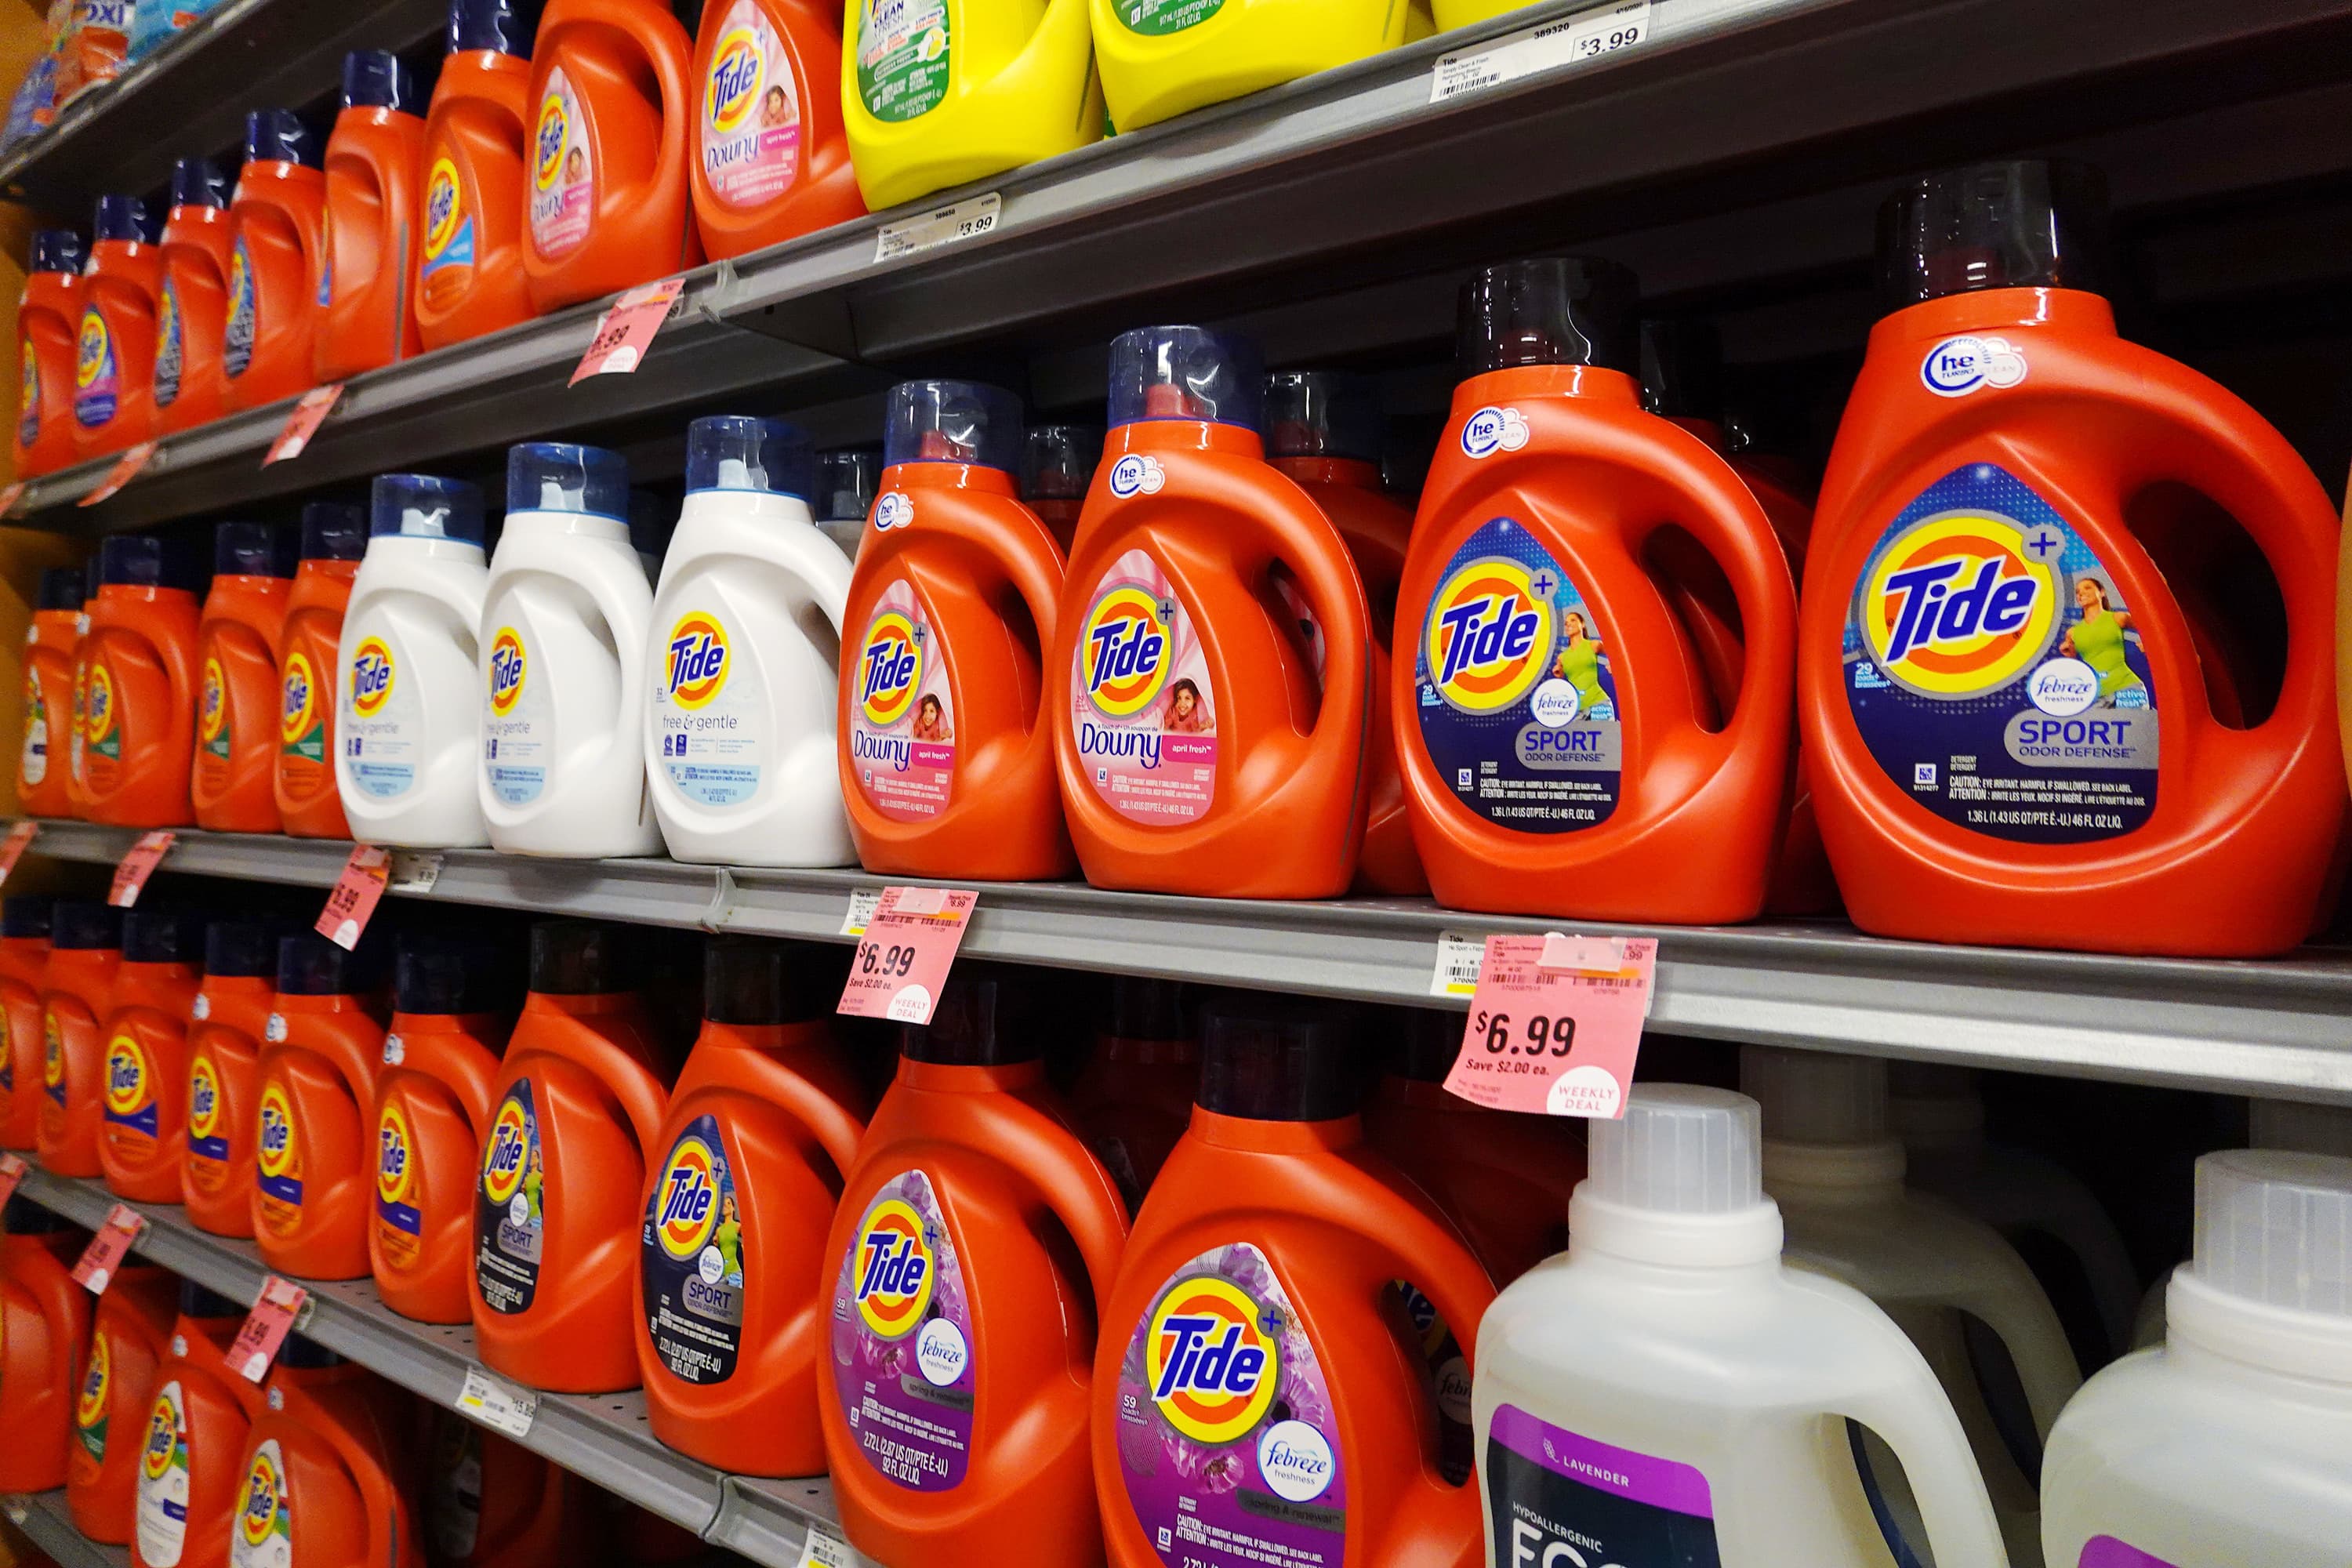 Higher prices ahead for Tide detergent and other Procter & Gamble products as costs climb higher